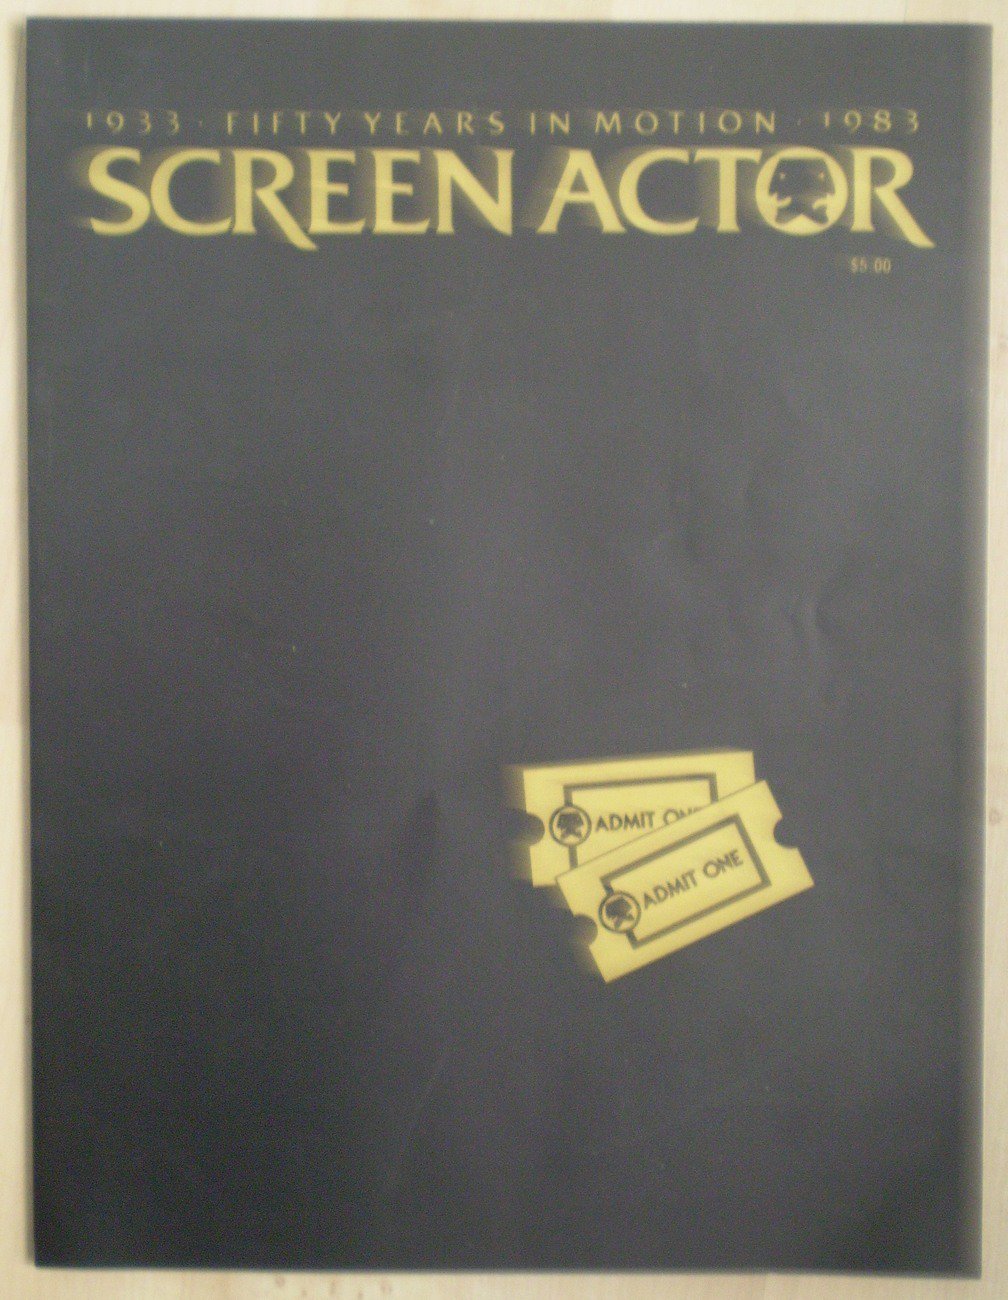 Screen Actor 1933-1983 Fifty Years in Motion August 1984